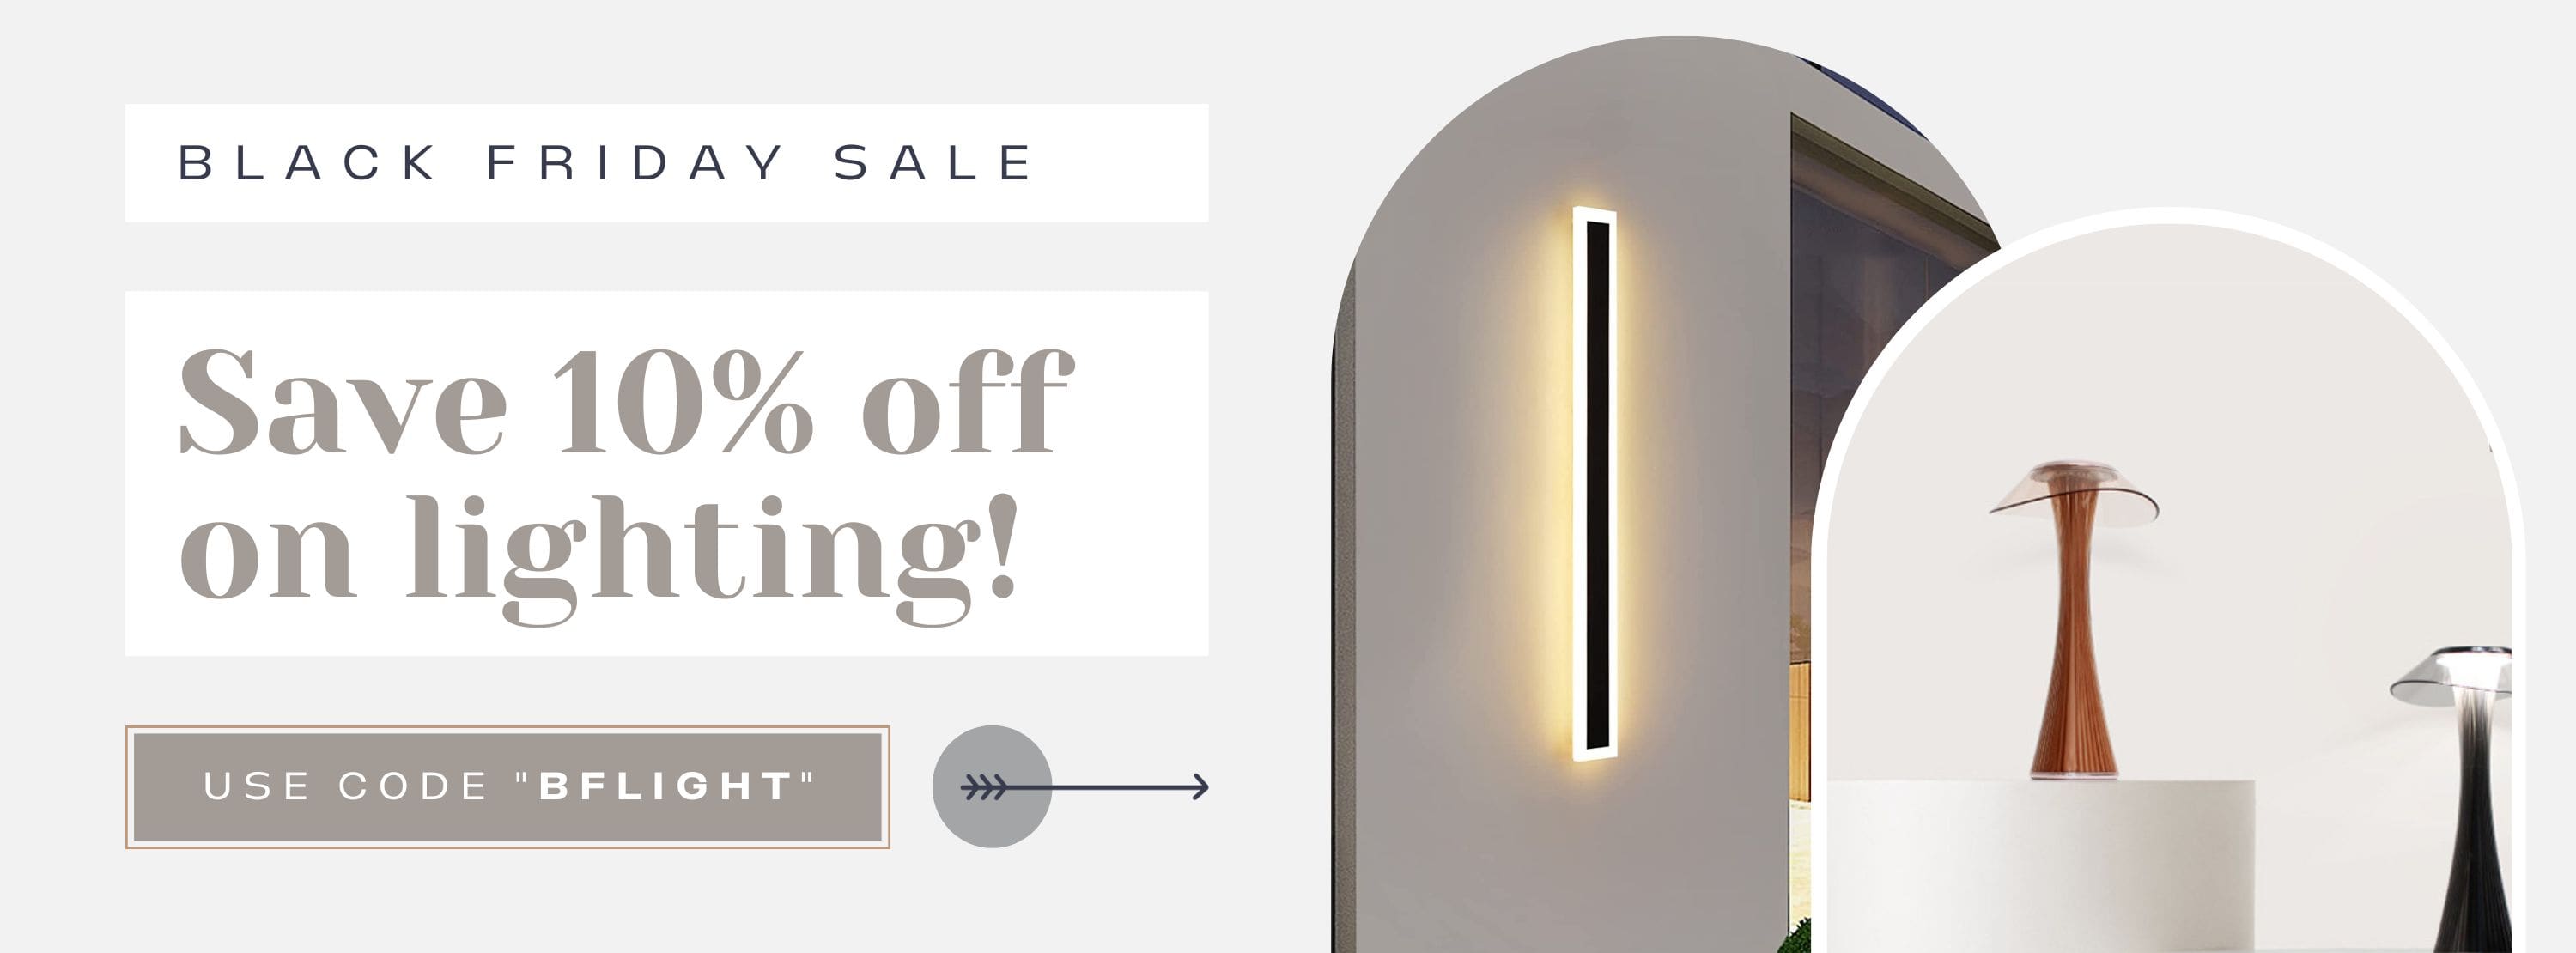 Black Friday Sale 2 - Save 10% off on lighting with code